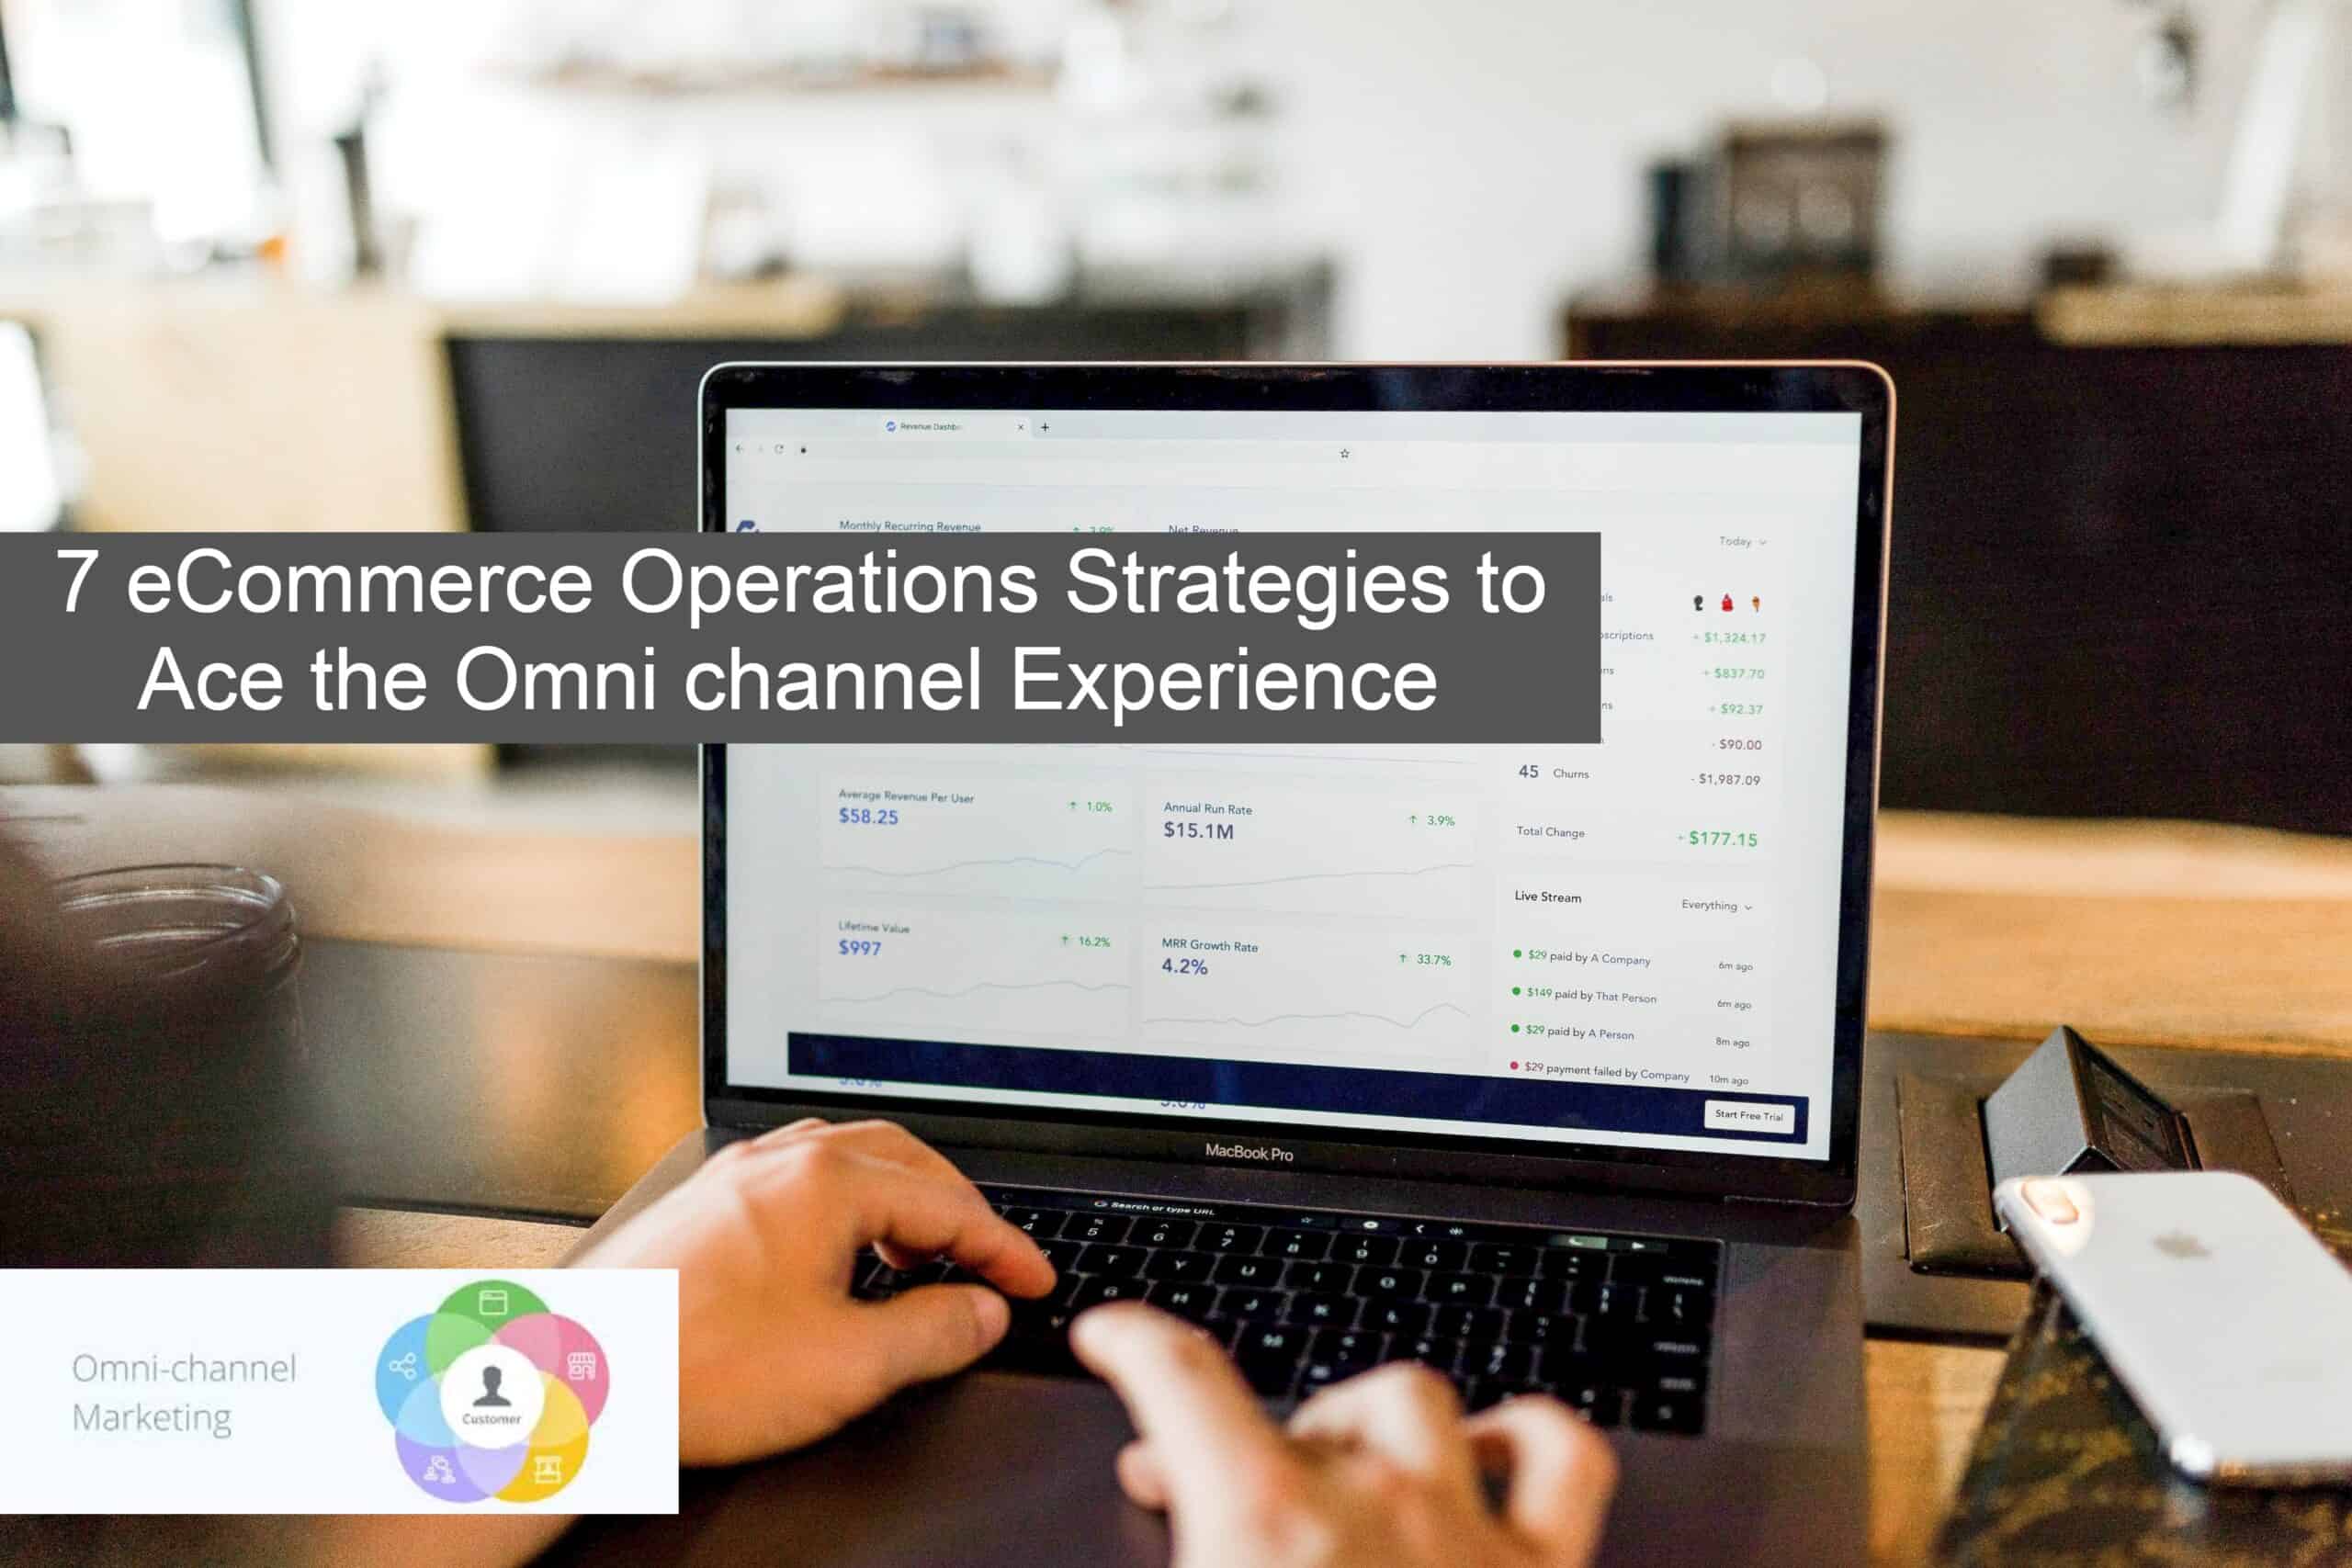 7 eCommerce Operations Strategies to Ace the Omni channel Experience